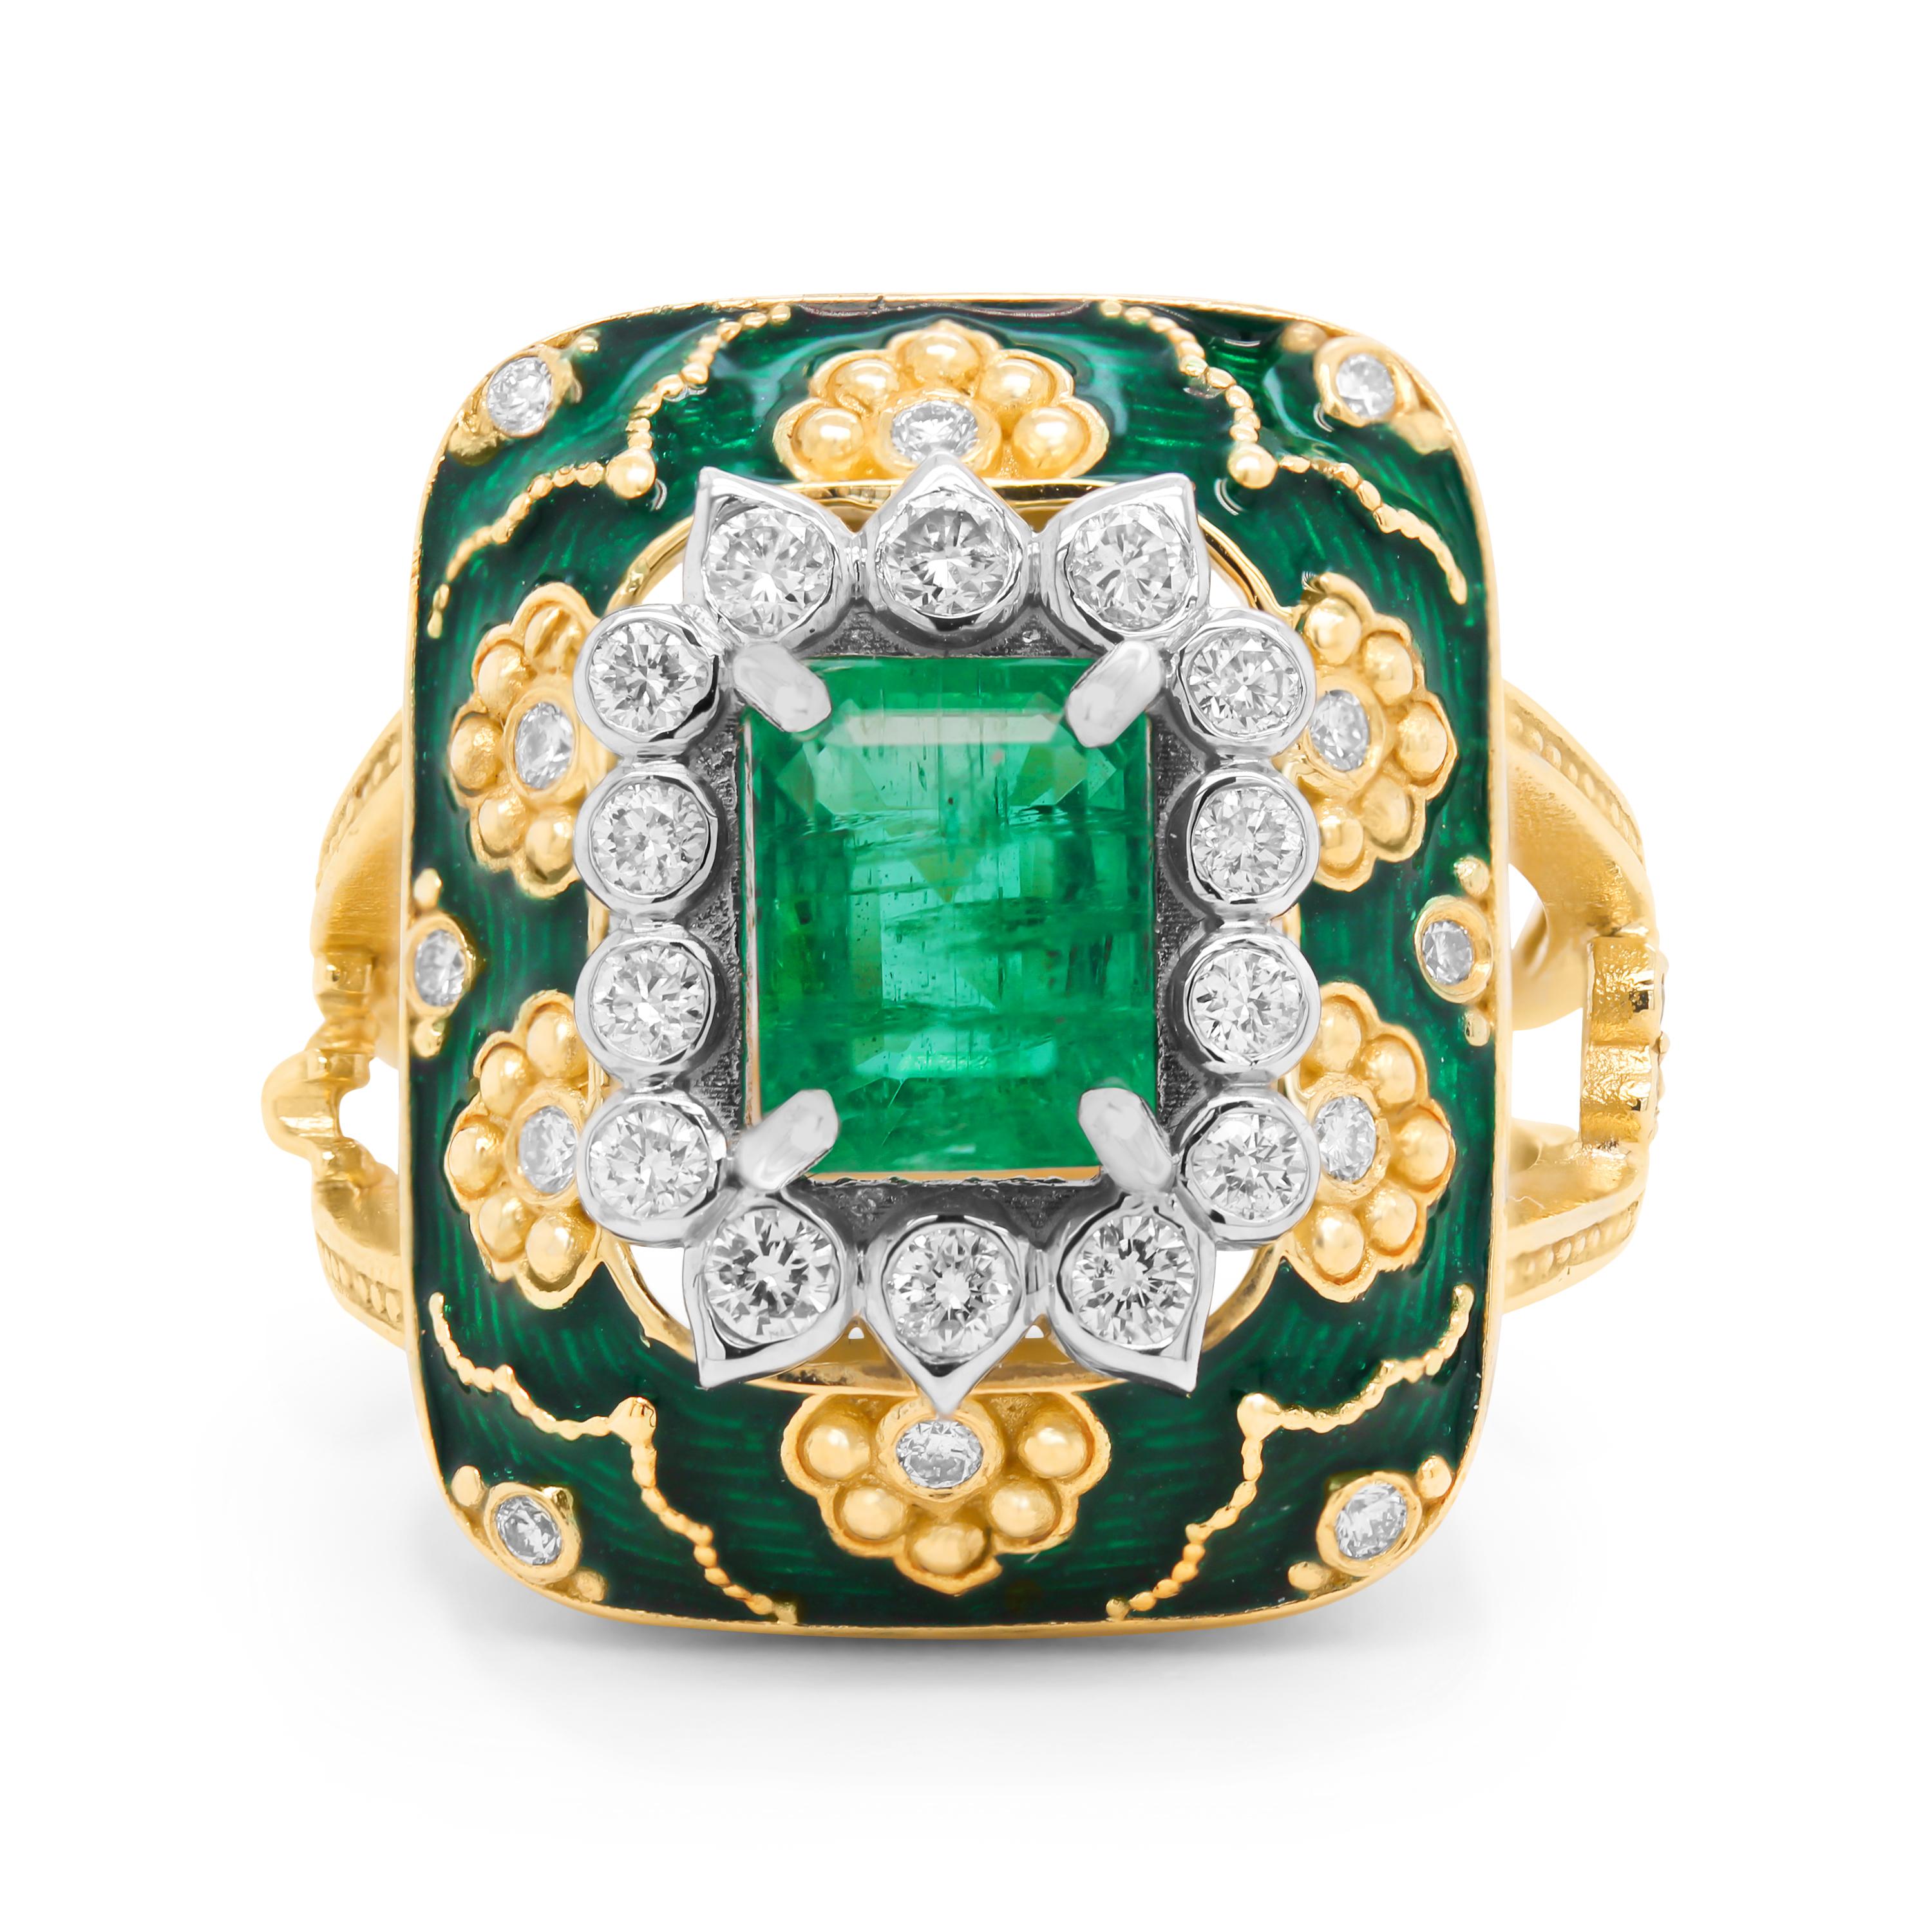 Stambolian 18K Gold and Diamond Emerald Center Green Enamel Cocktail Ring

A one-of-a-kind ring from the Stambolian 